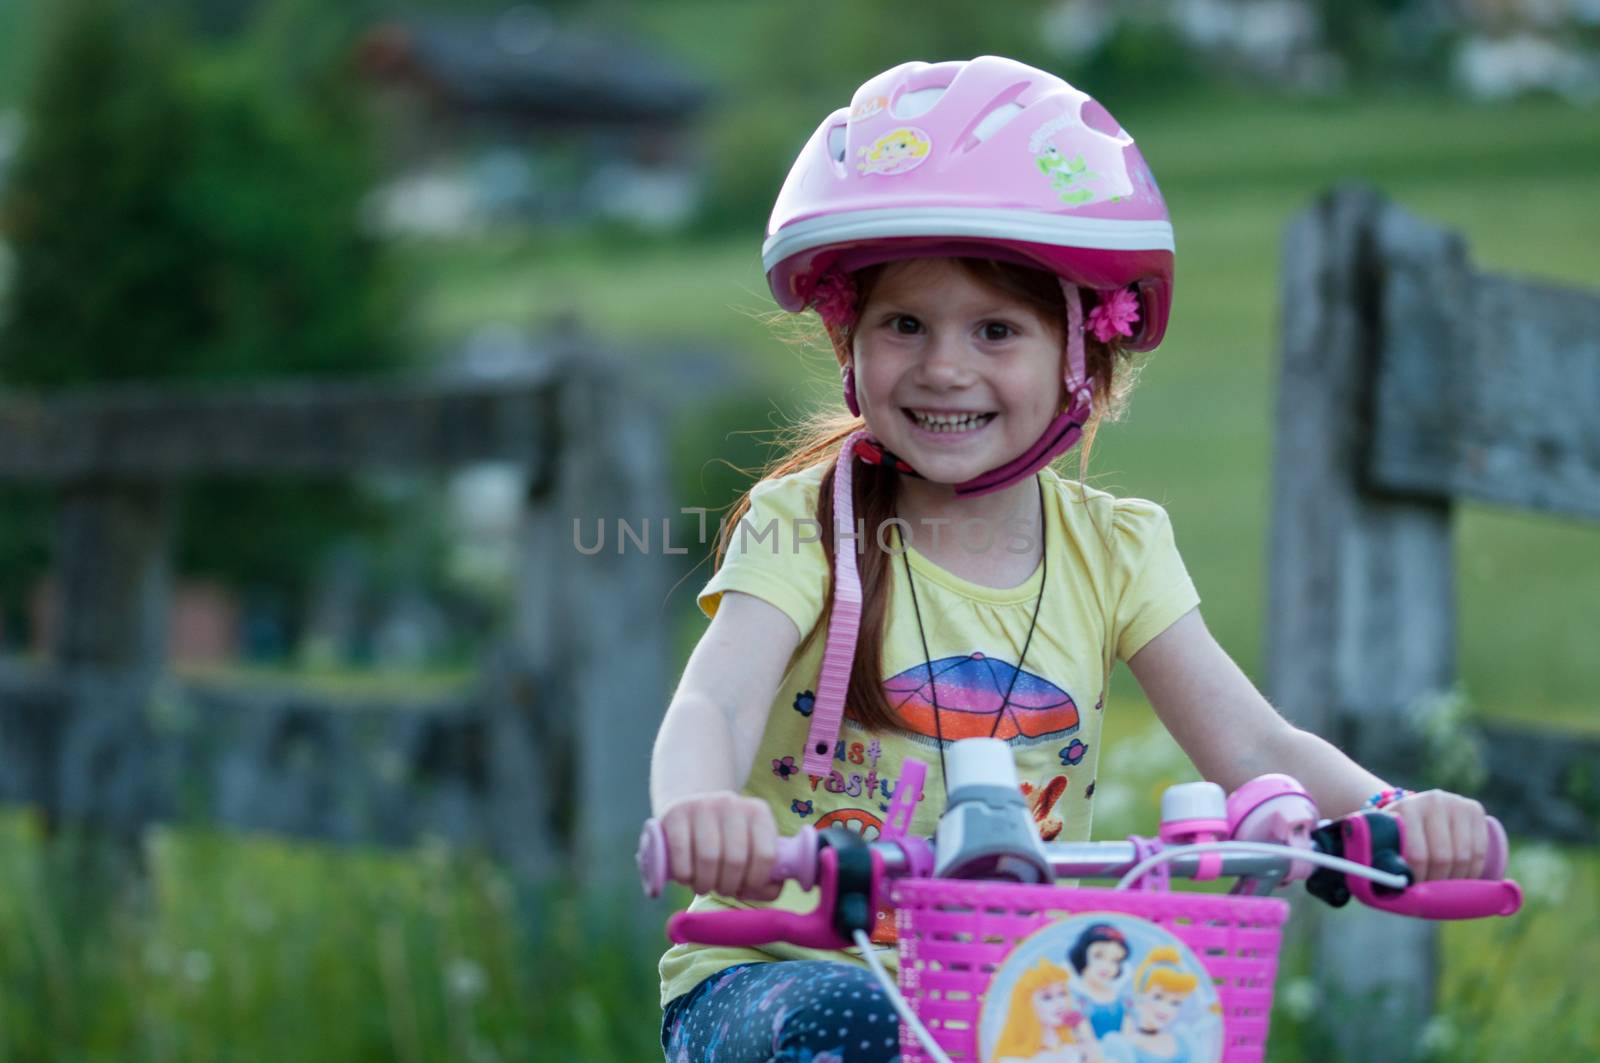 Little girl bicycling, background blurred,pink helmet